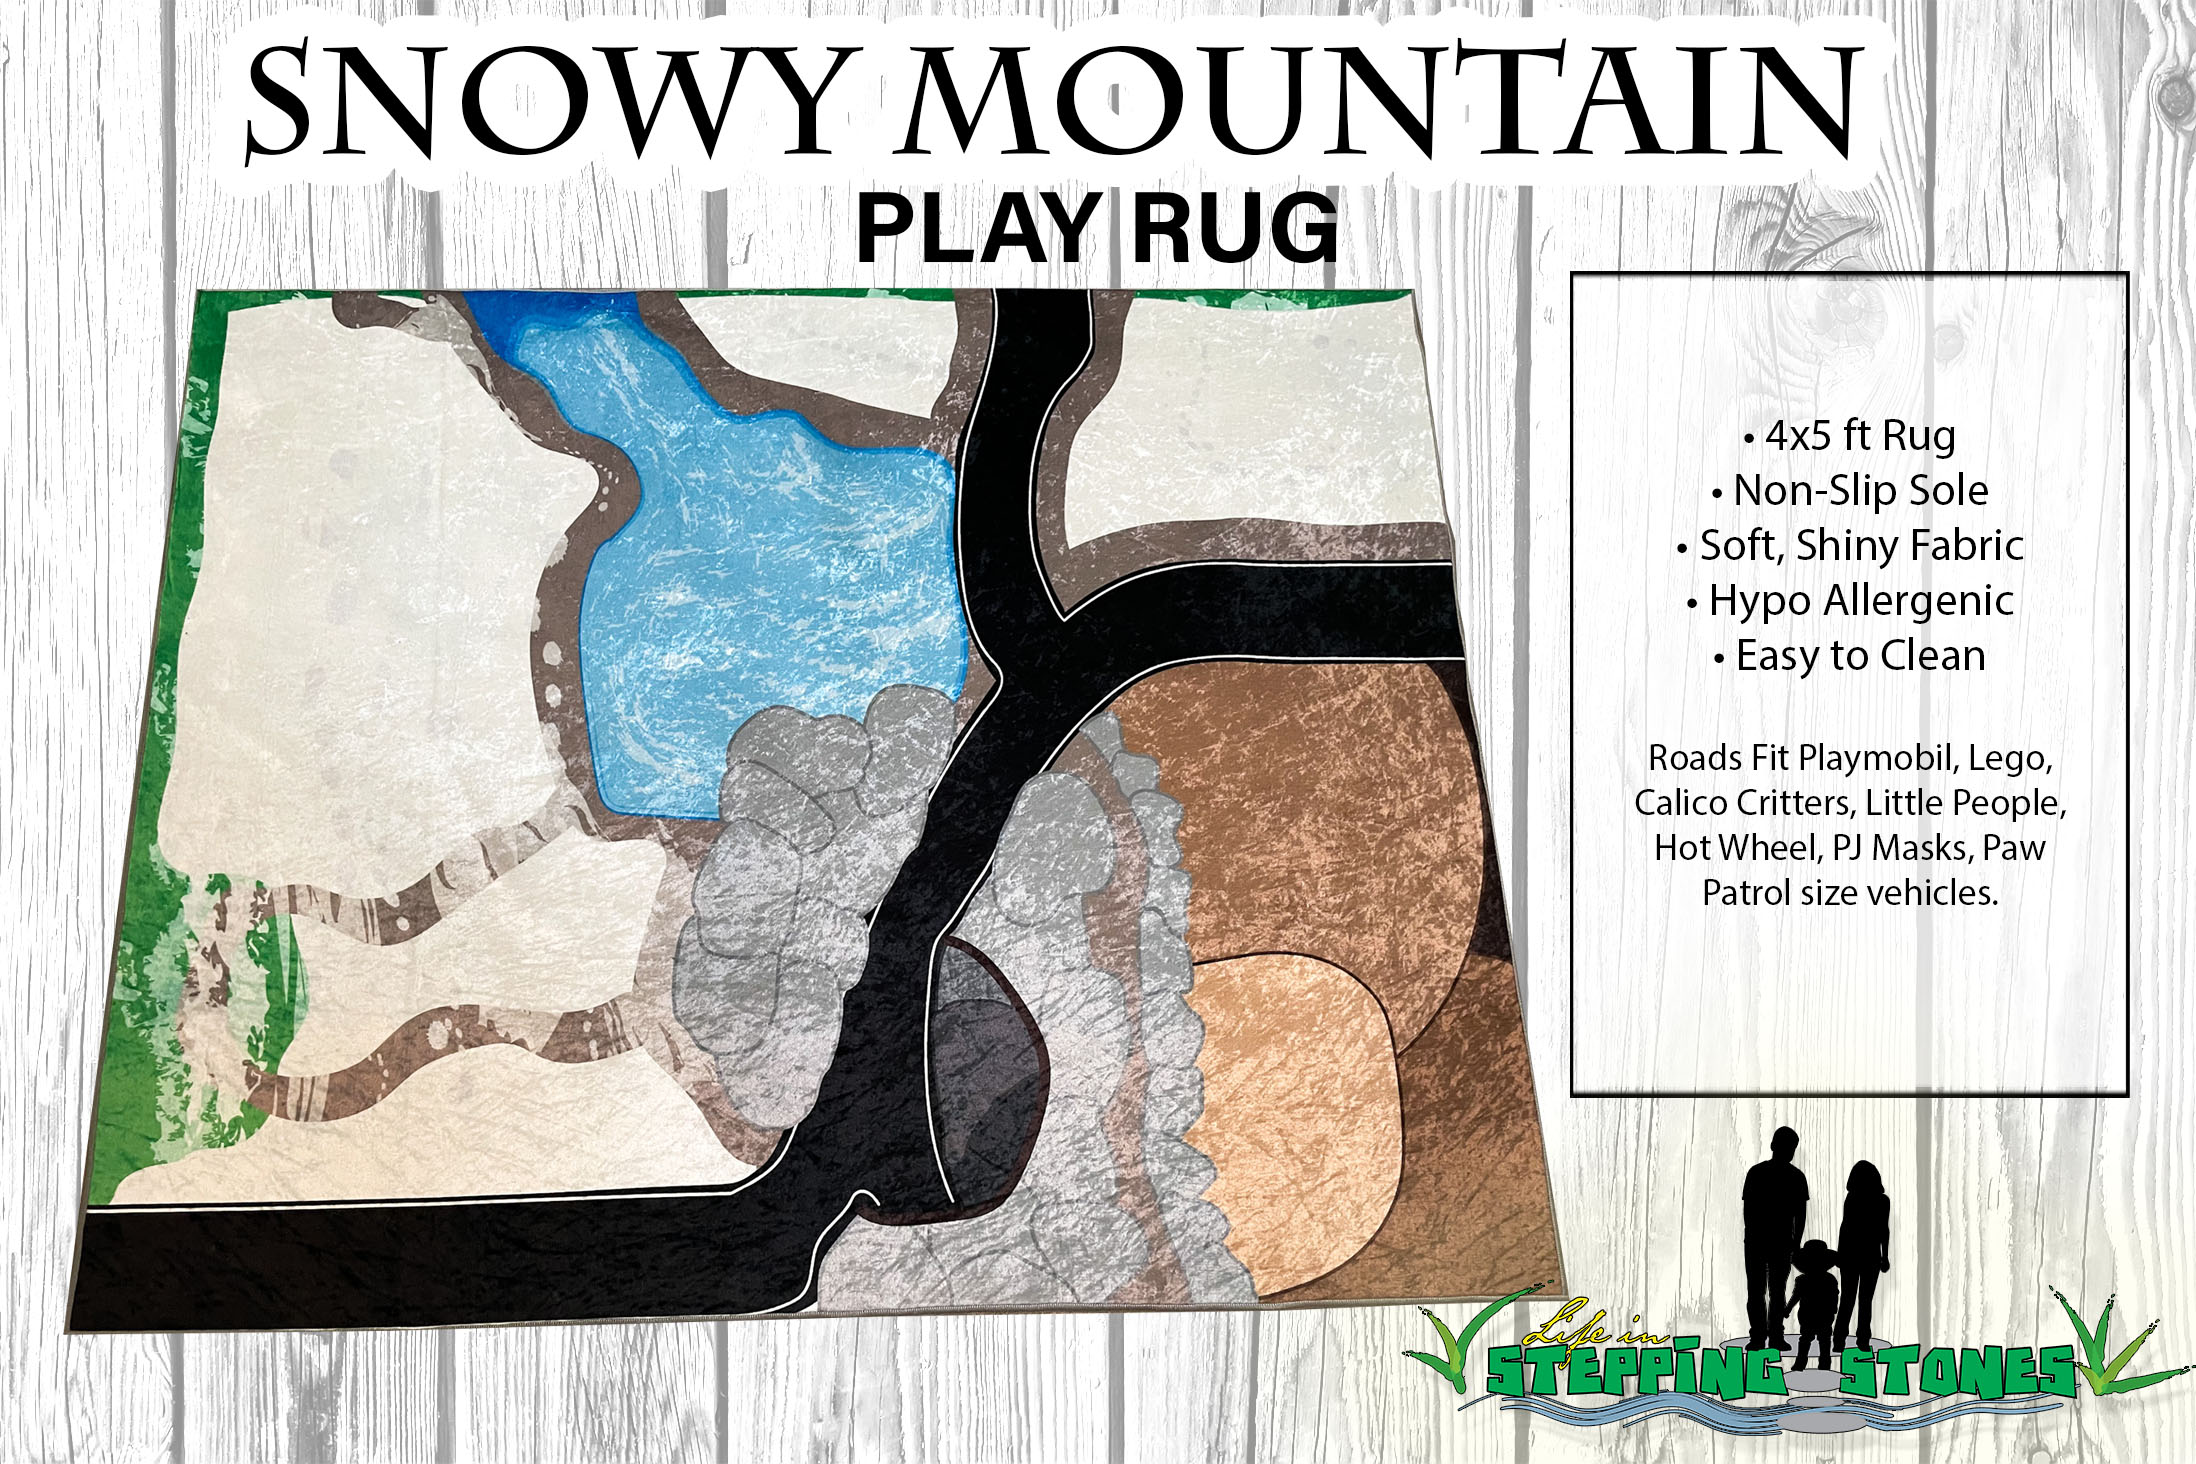 Snowy Mountain Town Play Rug with wide roads for cars - fits Playmobil, Lego, Paw Patrol, PJ Masks, Calico Critters, and more. Perfect for playroom, child's bedroom, nursery, or classroom.